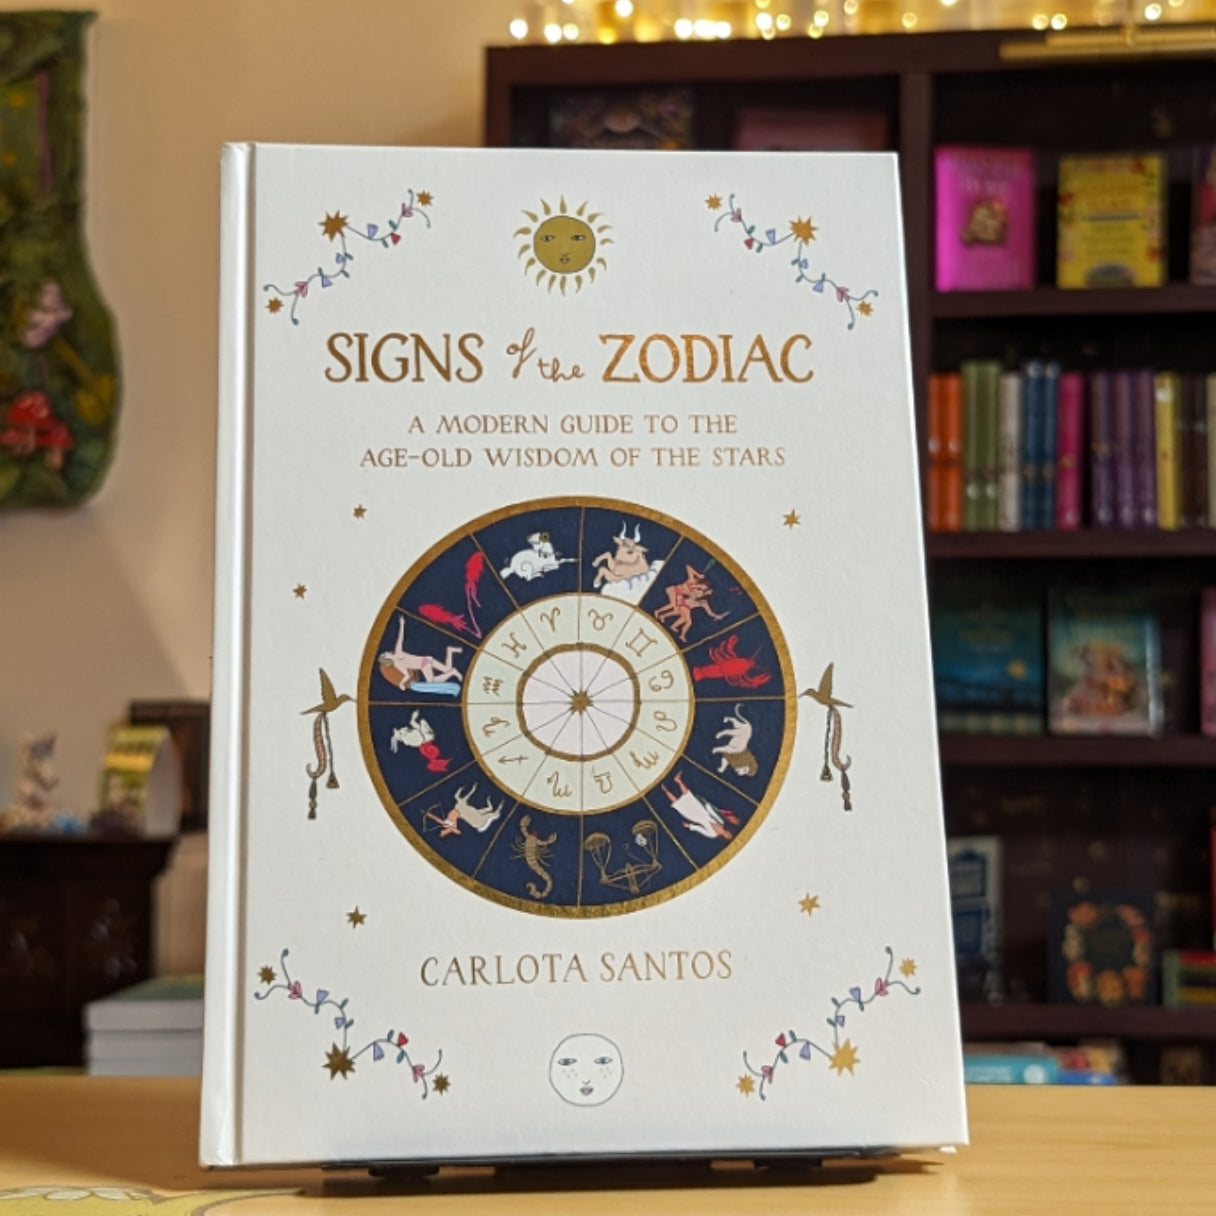 Signs of the Zodiac: A Modern Guide to the Age-Old Wisdom of the Stars